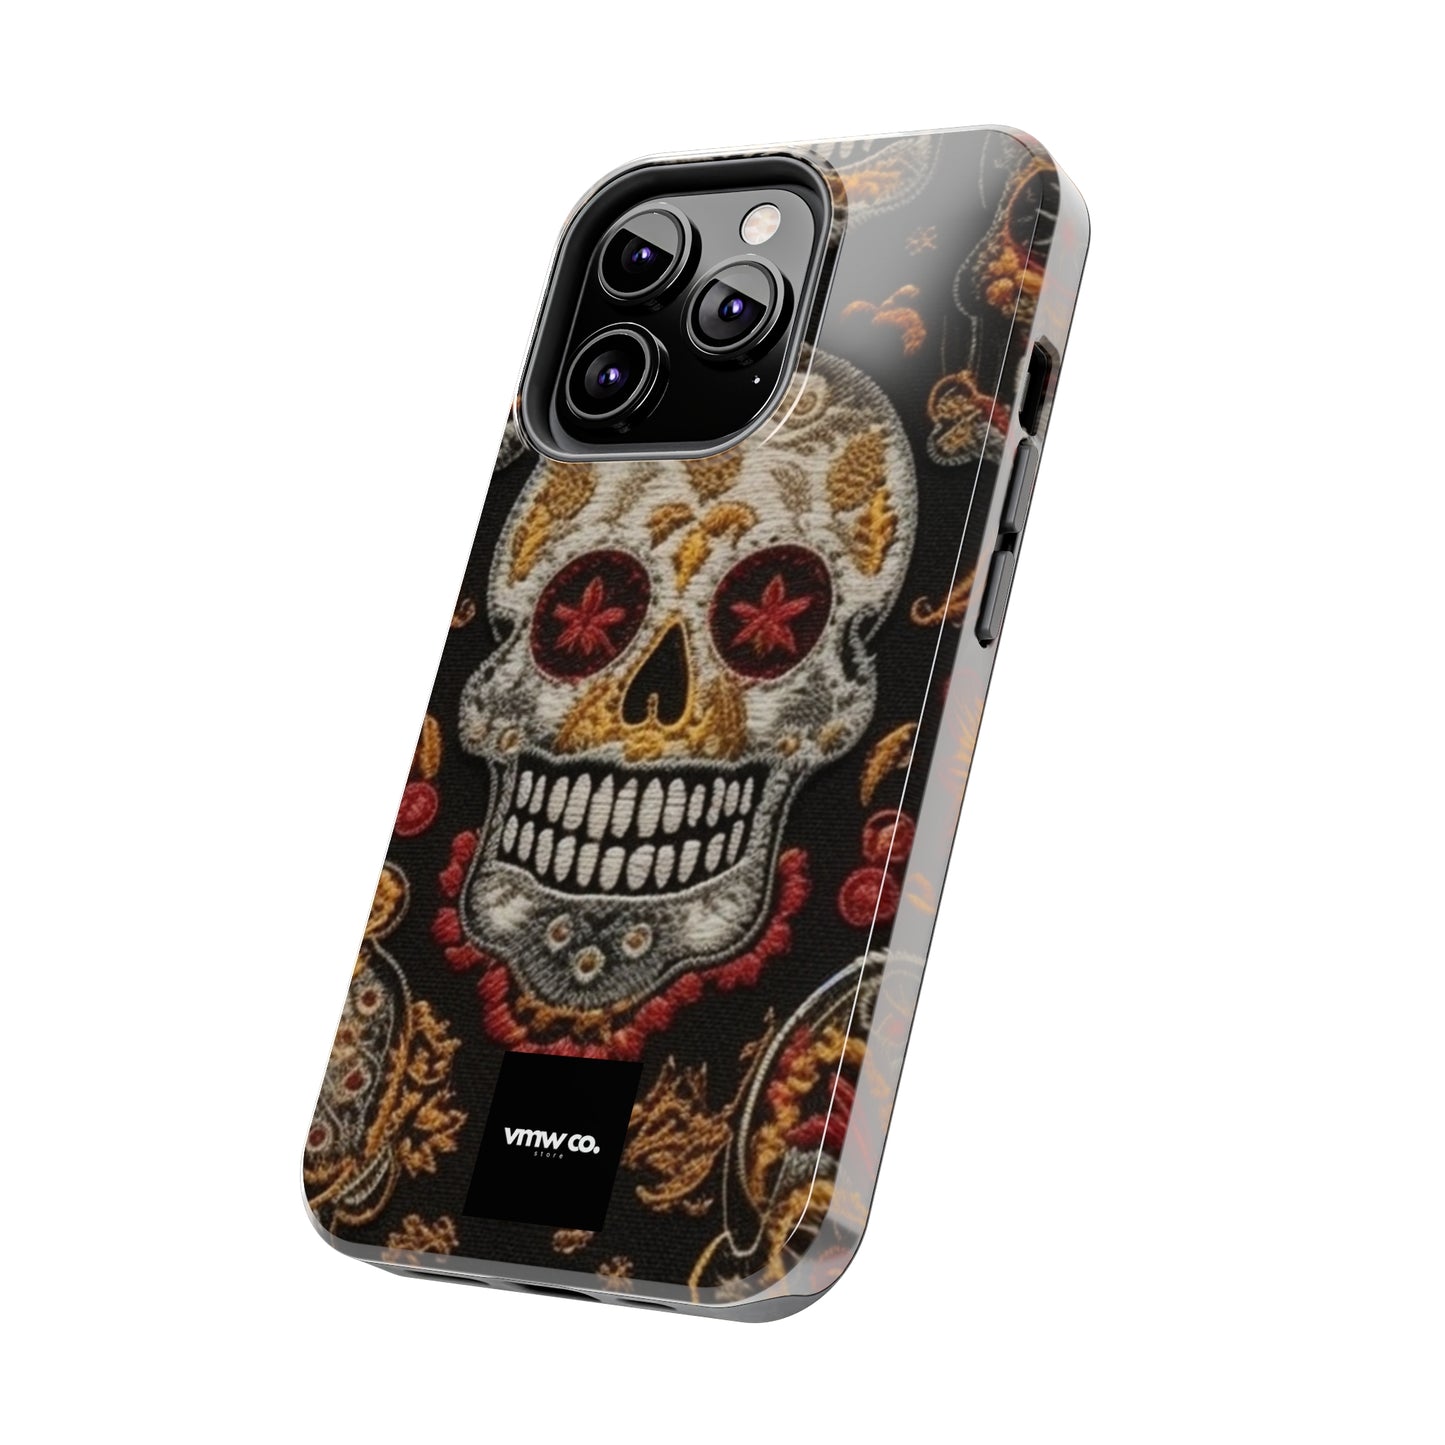 Embroidered Skulls iPhone Tough Phone Cases